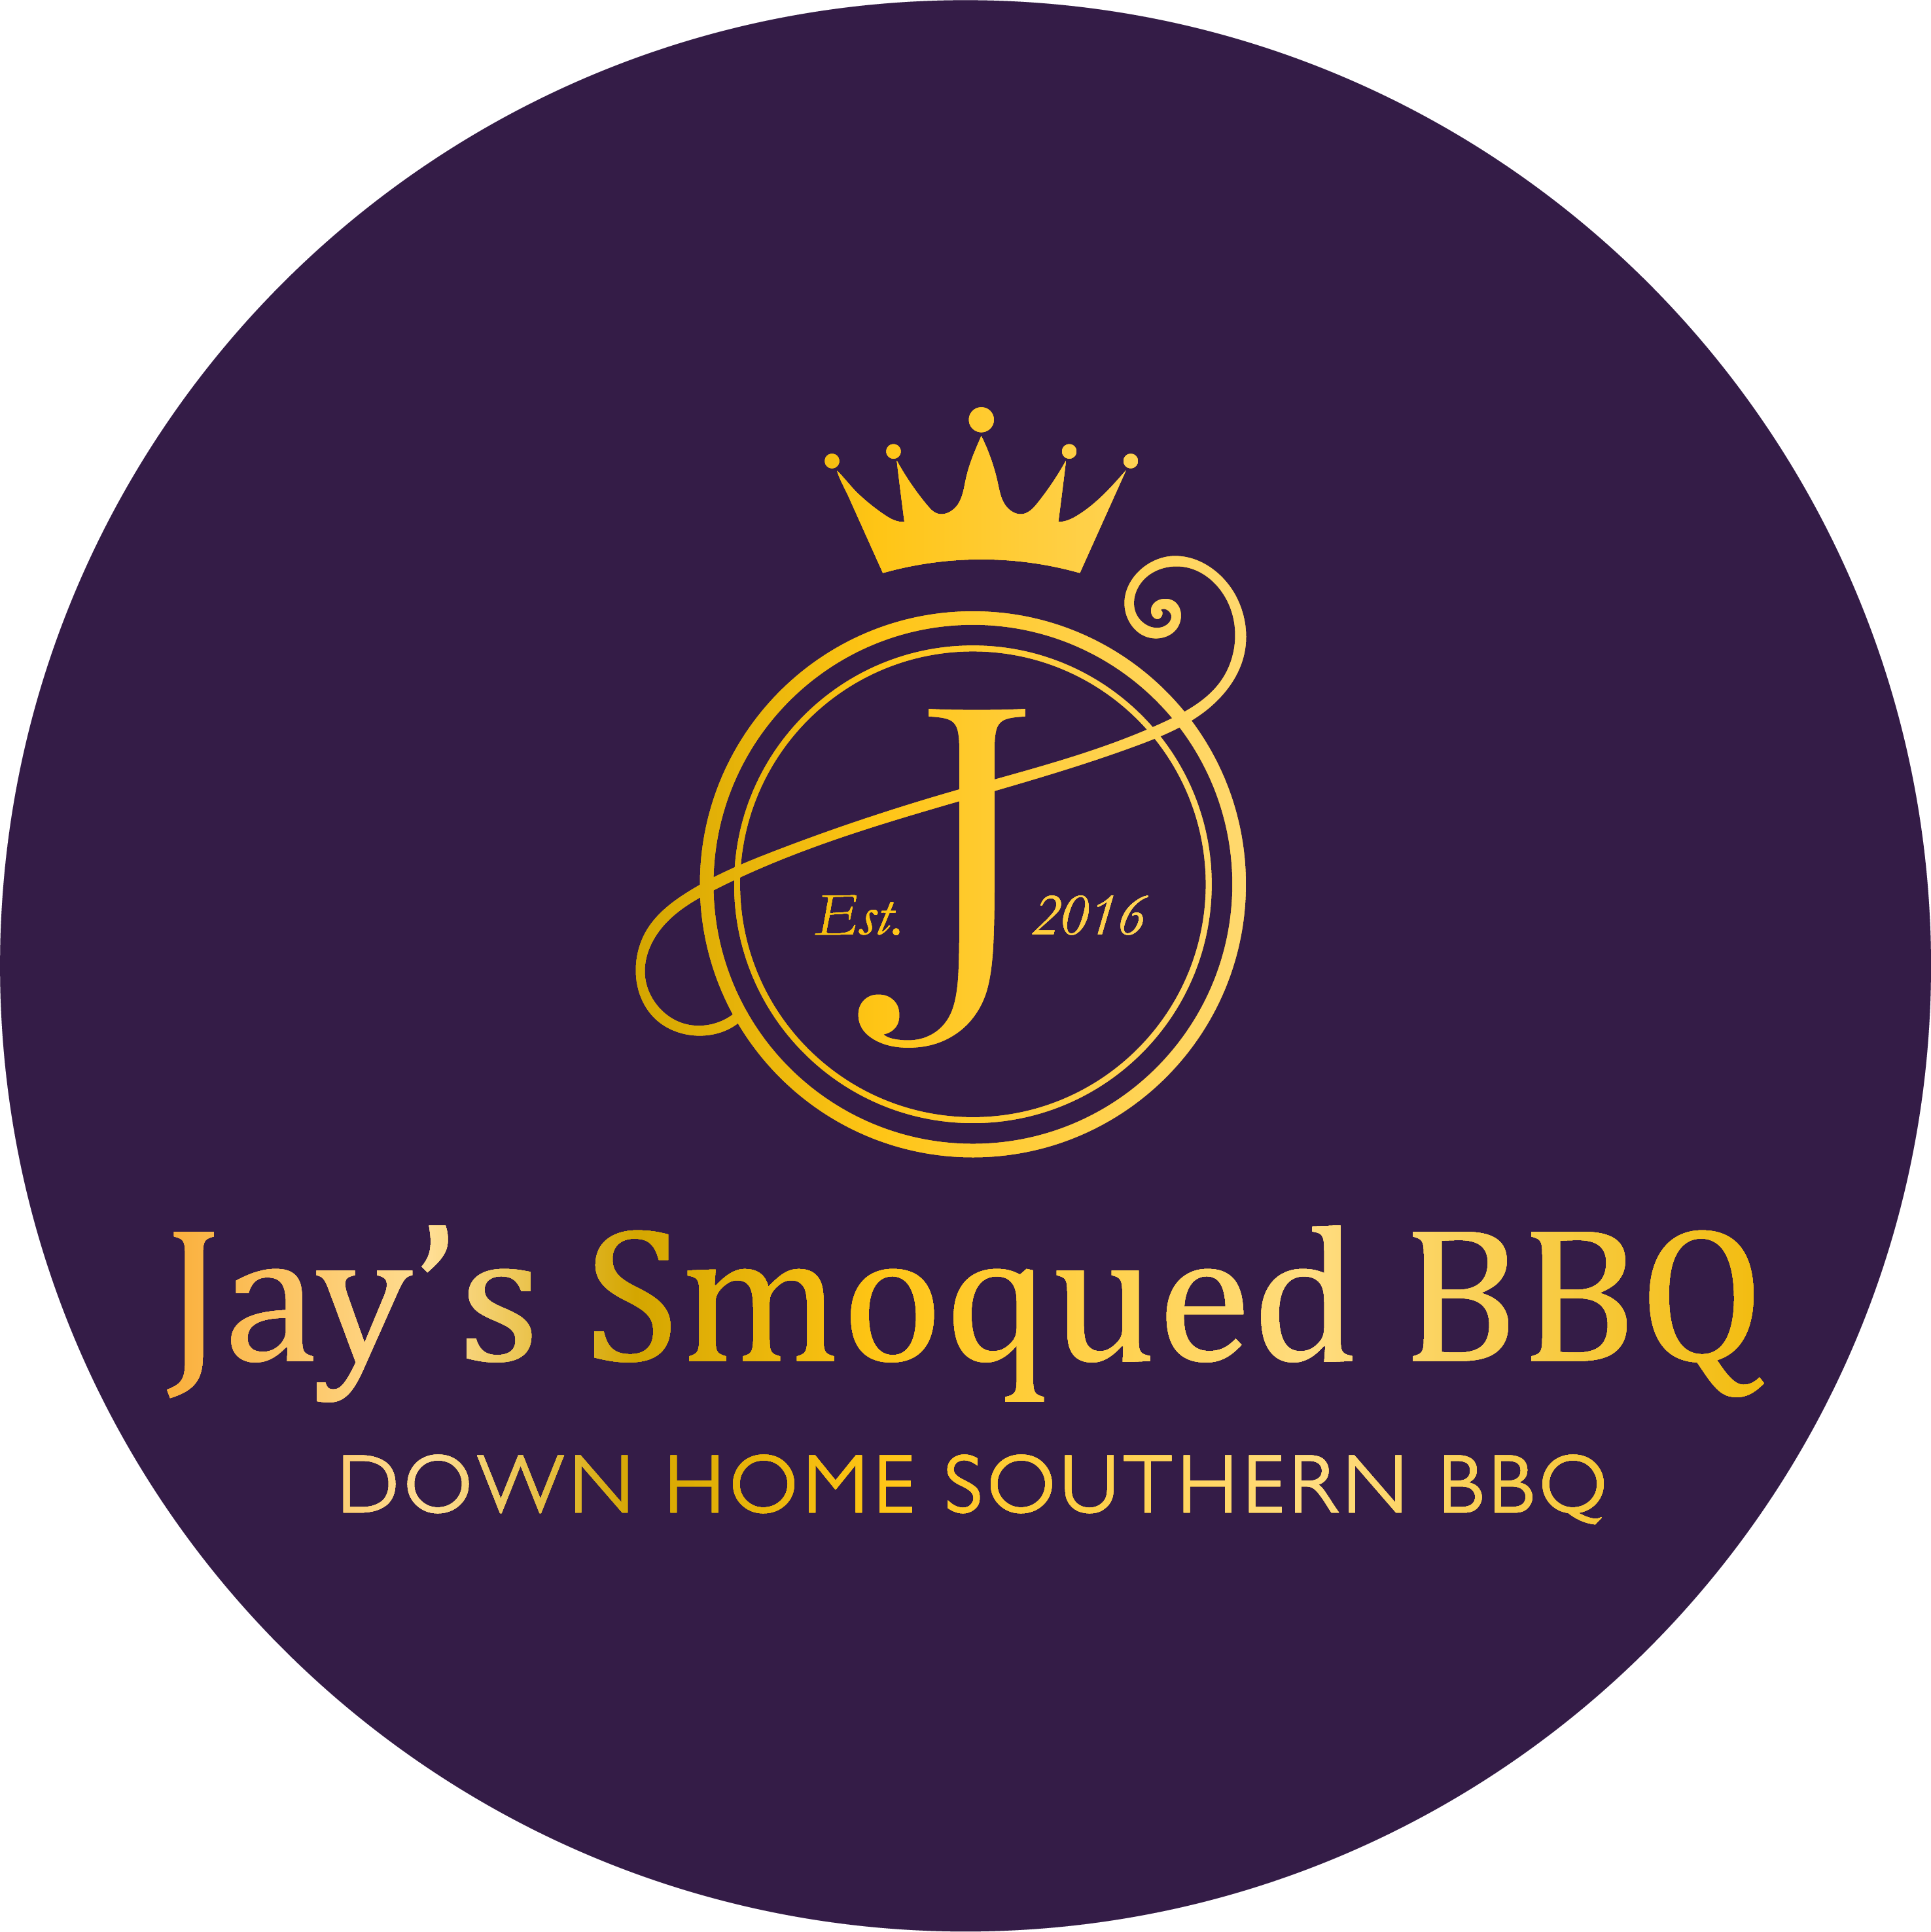 Jay’s Smoqued BBQ 2804 S. Rutherford Blvd.